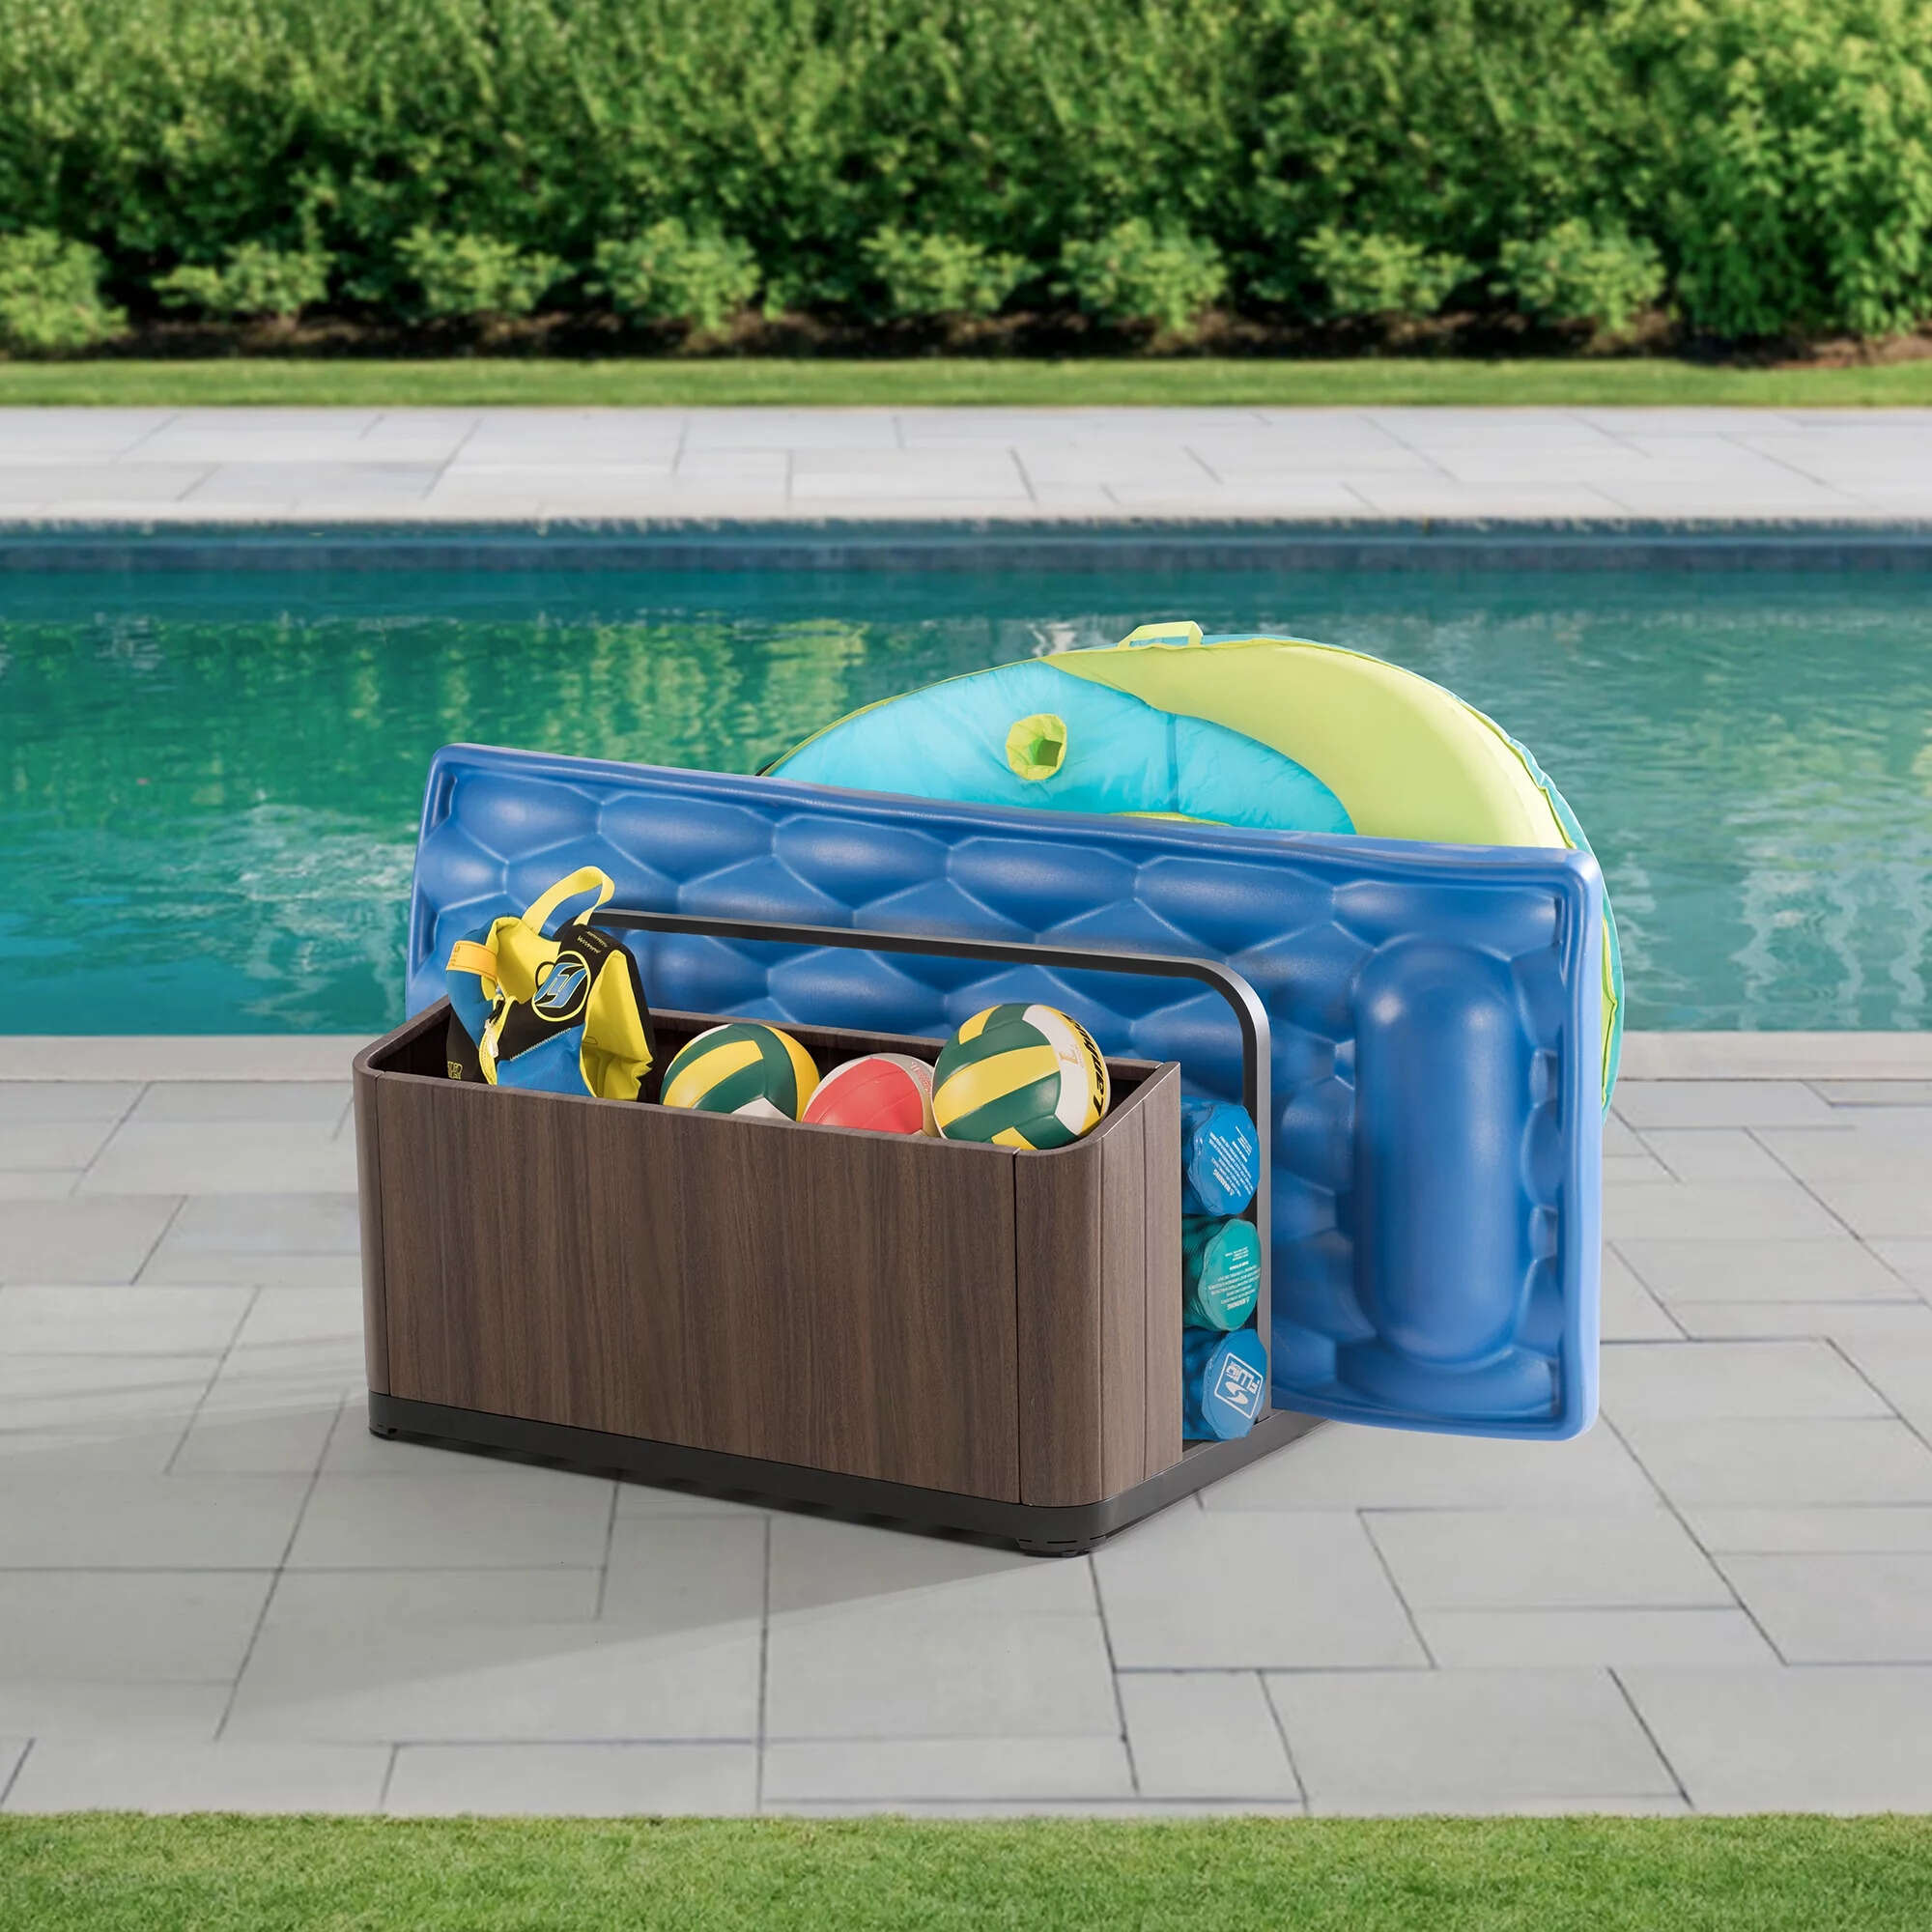 How To Store Pool Floats For Winter